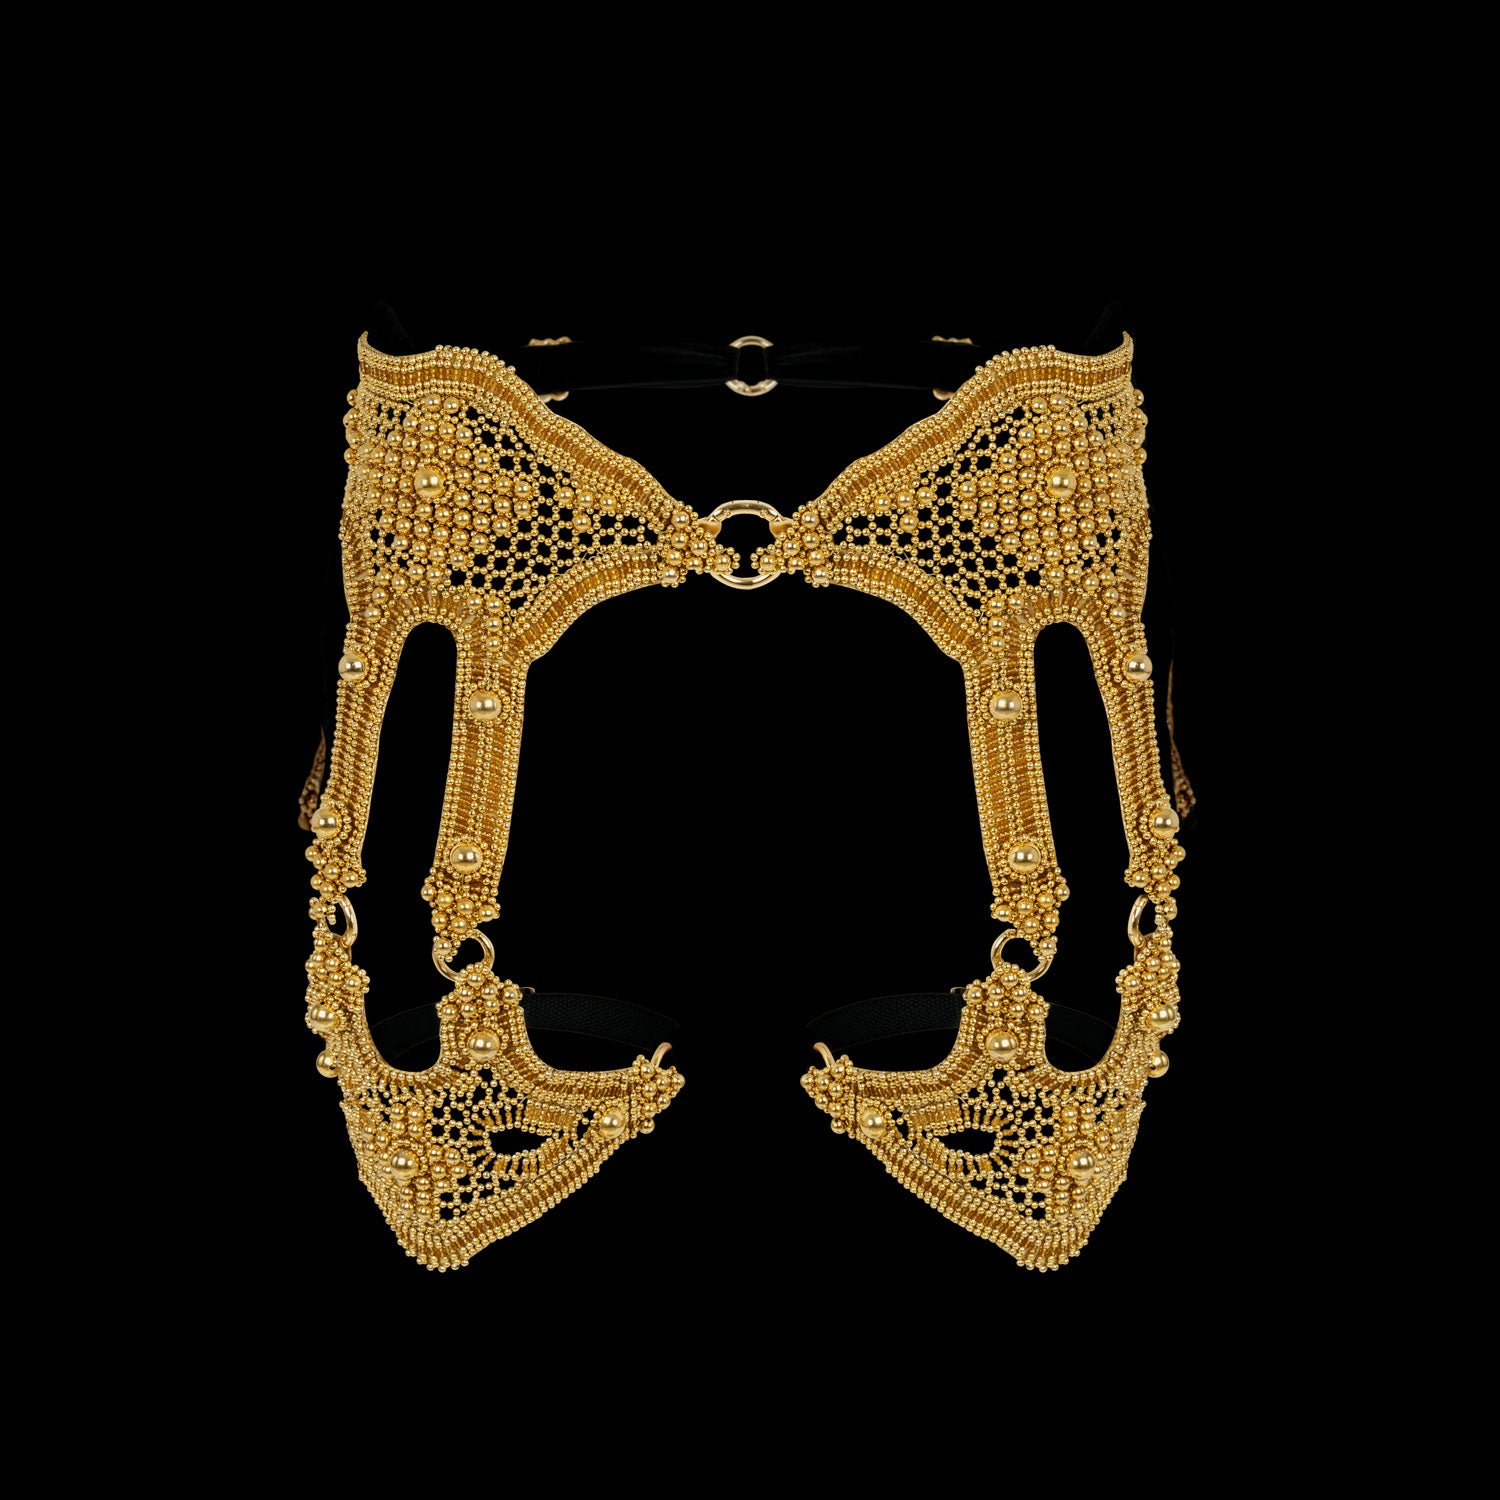 Khutulun Complete Body System in Gold